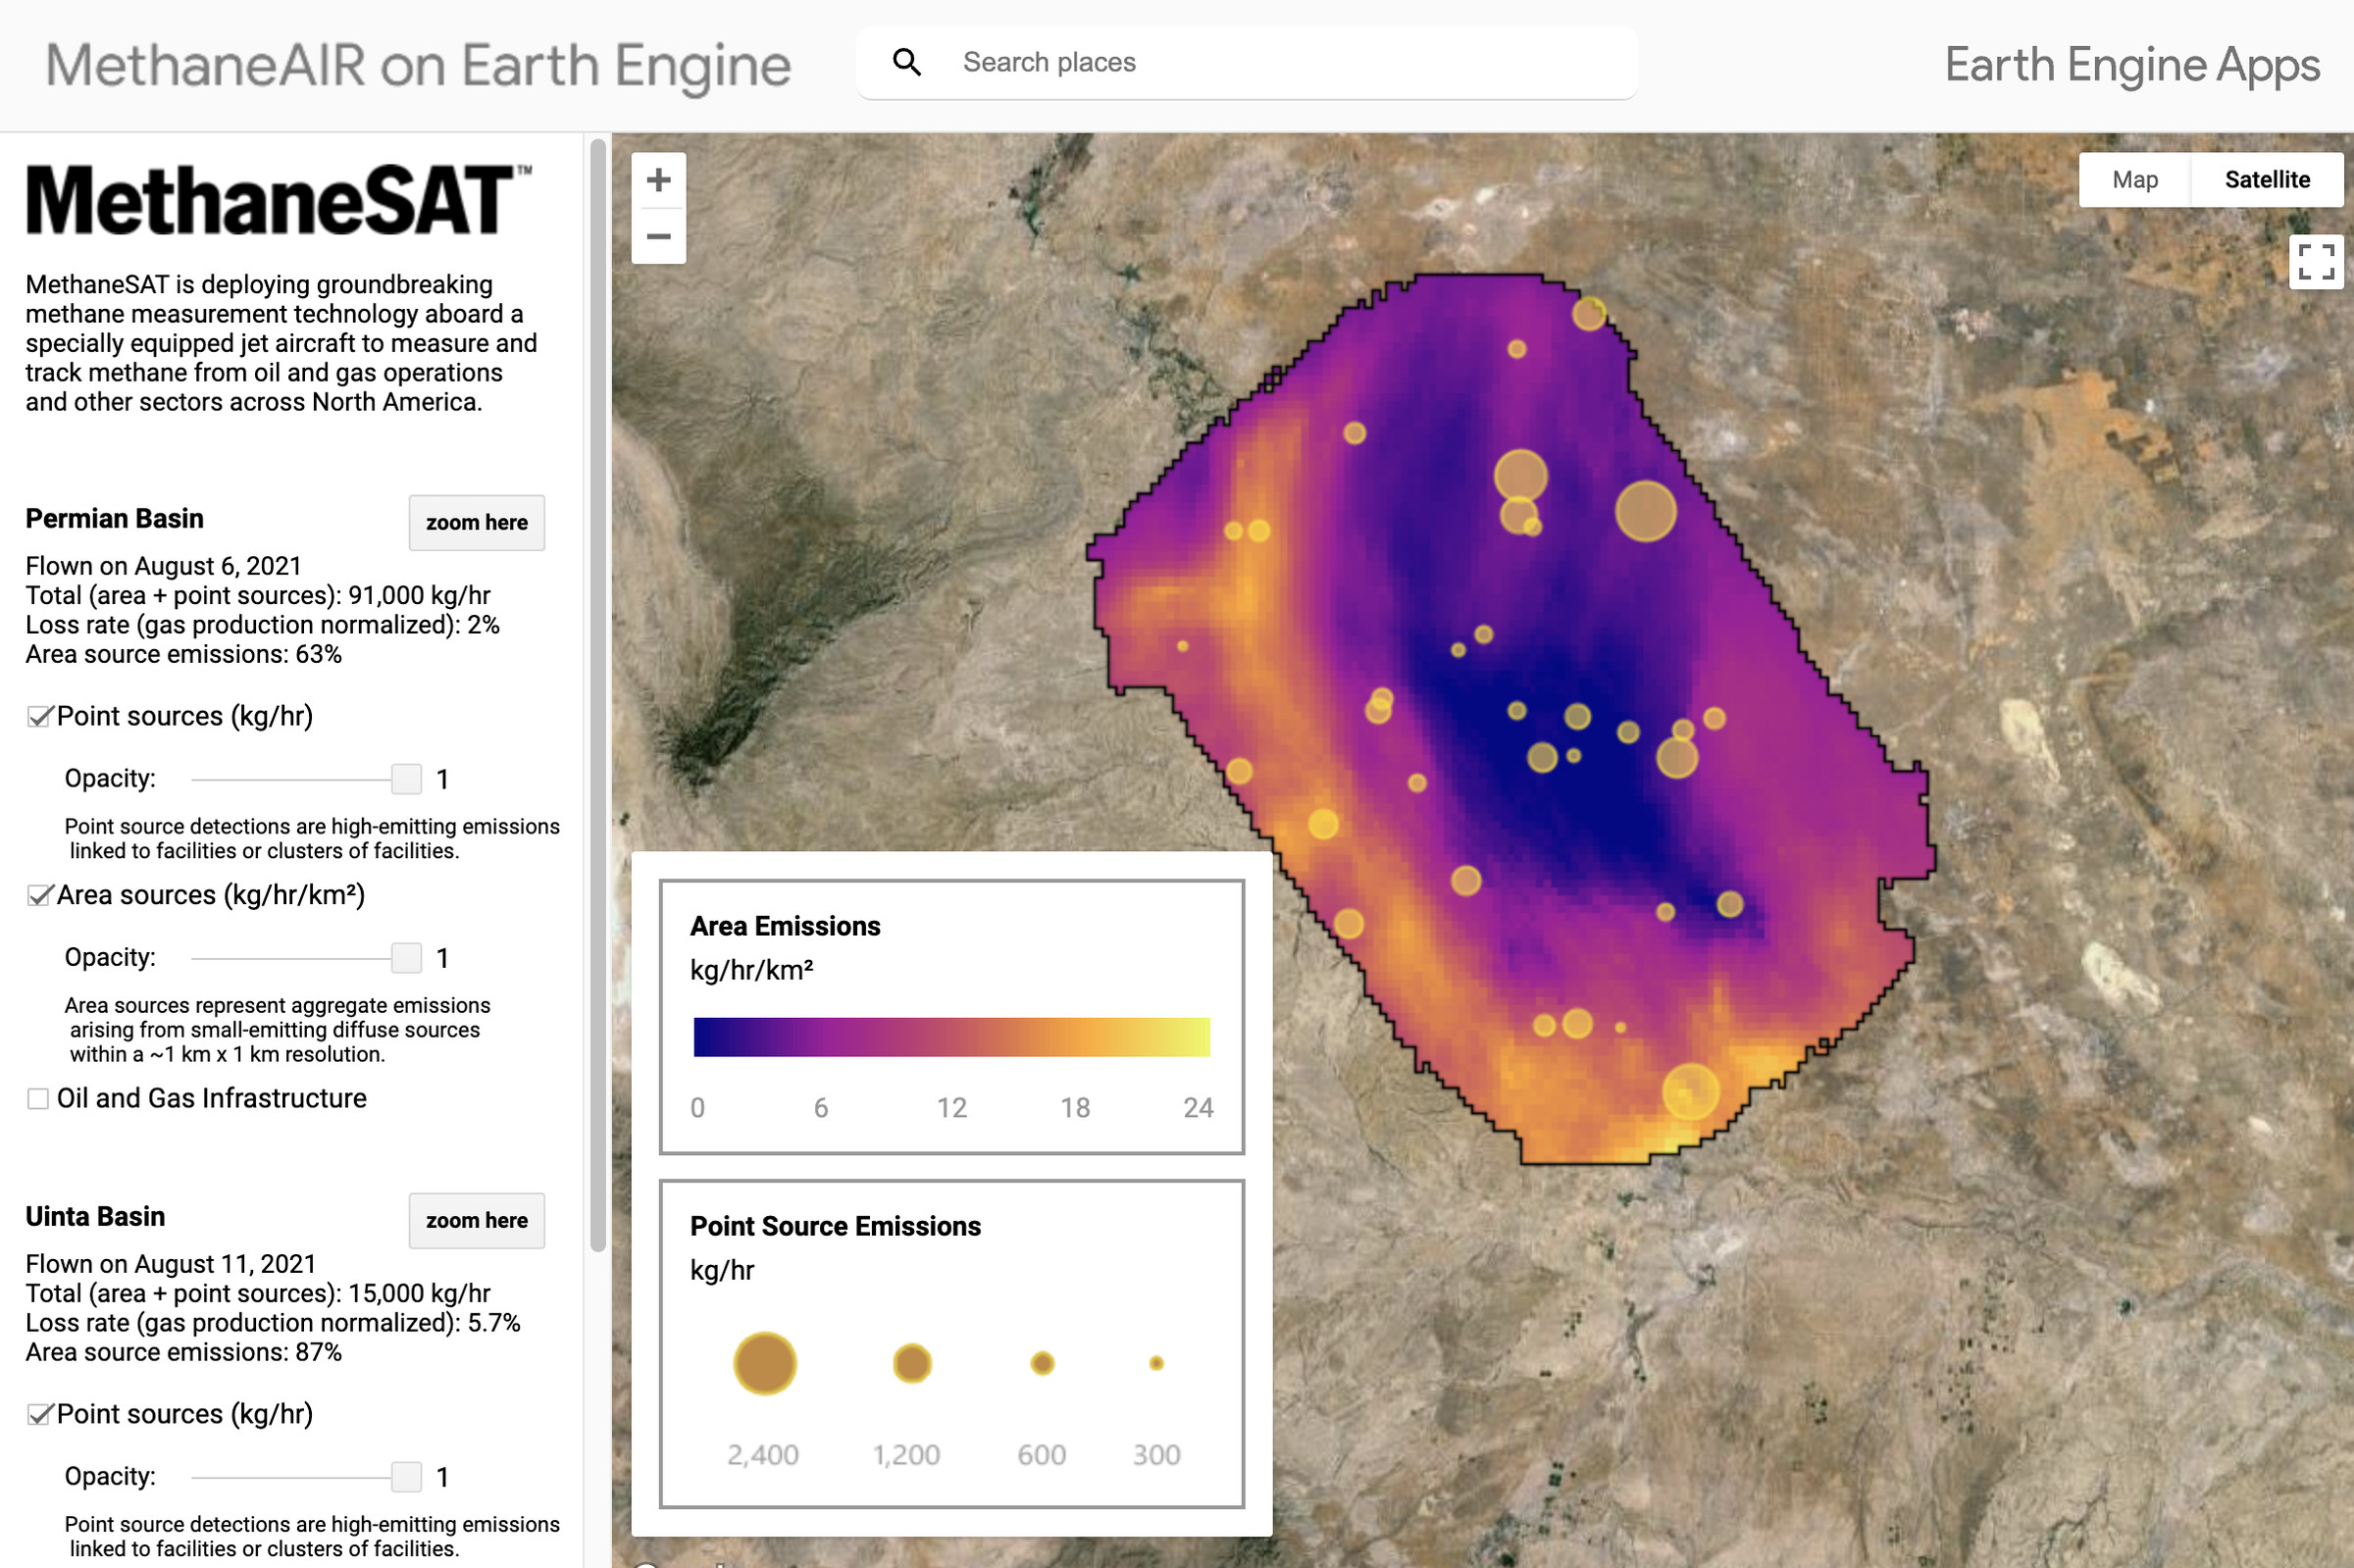 A rendering depicting high-emitting sources of methane pollution as yellow dots, and diffuse sources as a purple and yellow heat map against satellite imagery of Earth.